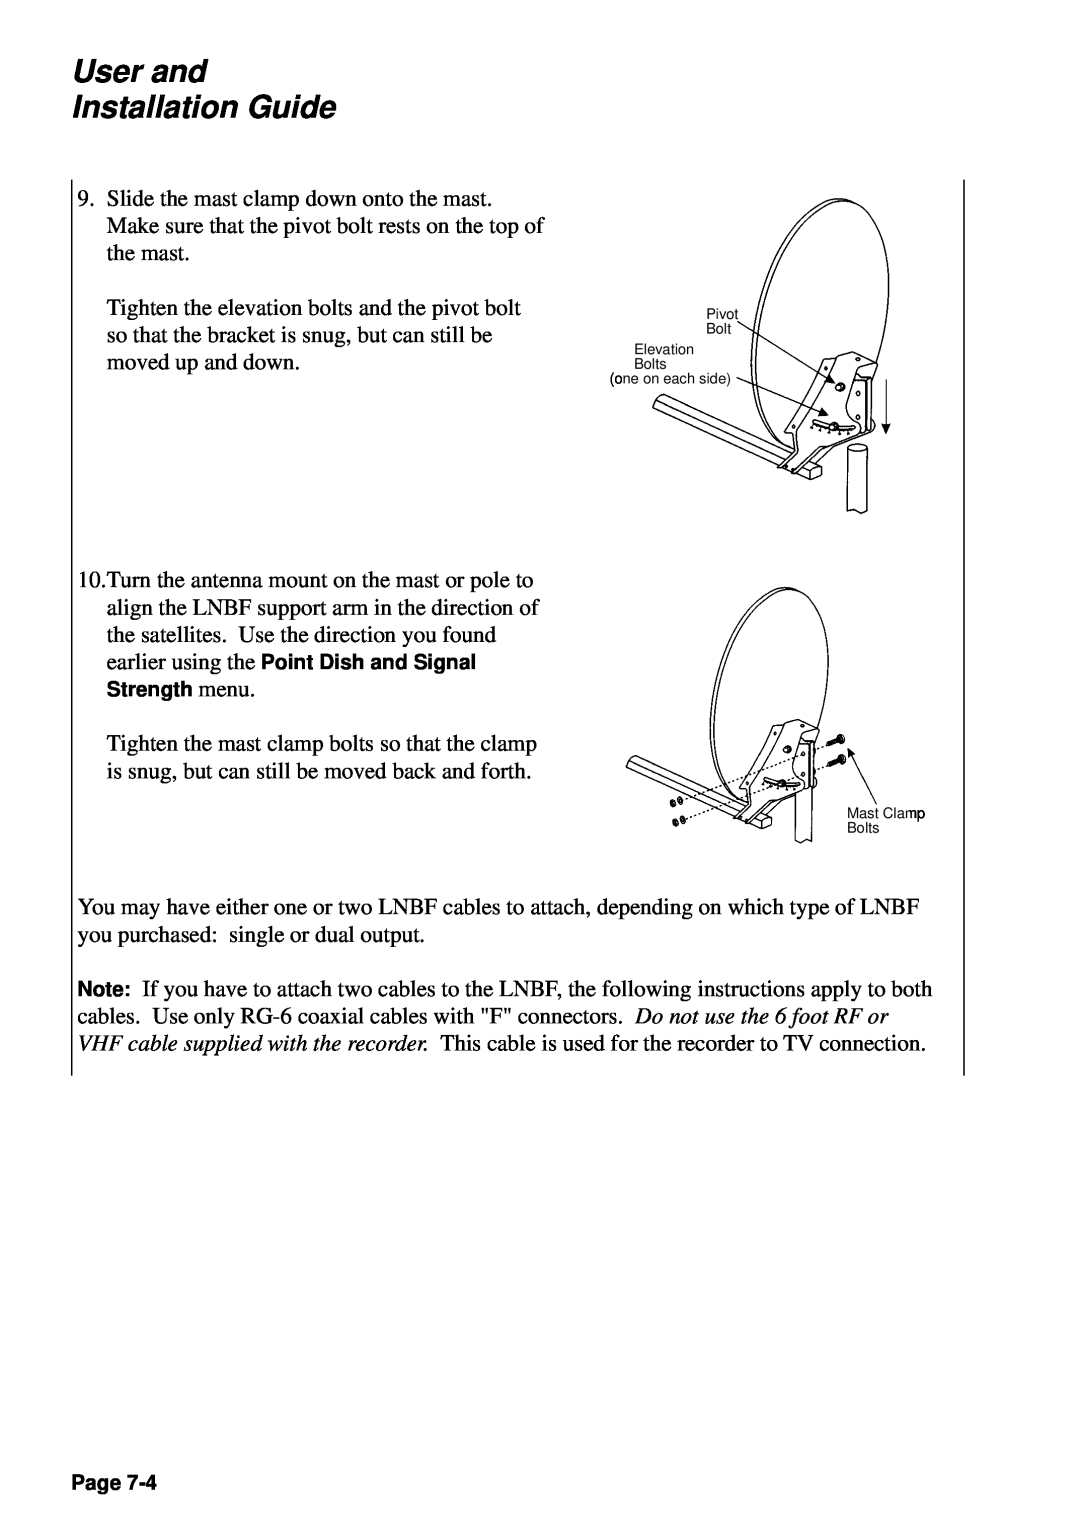 JVC HM-DSR100RU manual User and Installation Guide, Pivot Bolt Elevation Bolts one on each side Mast Clamp Bolts 